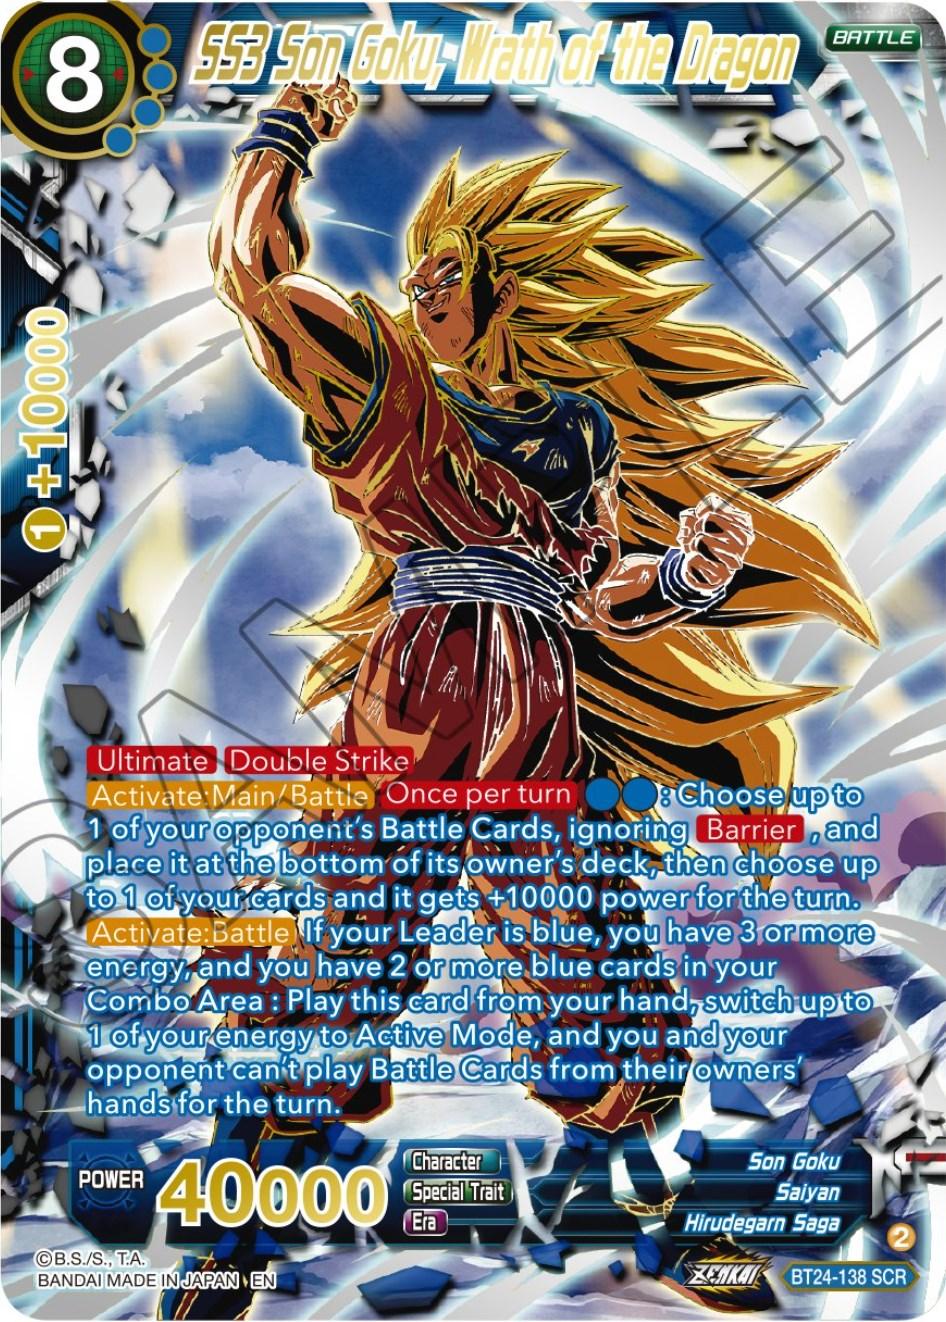 SS3 Son Goku, Wrath of the Dragon (Collector Booster) (BT24-138 